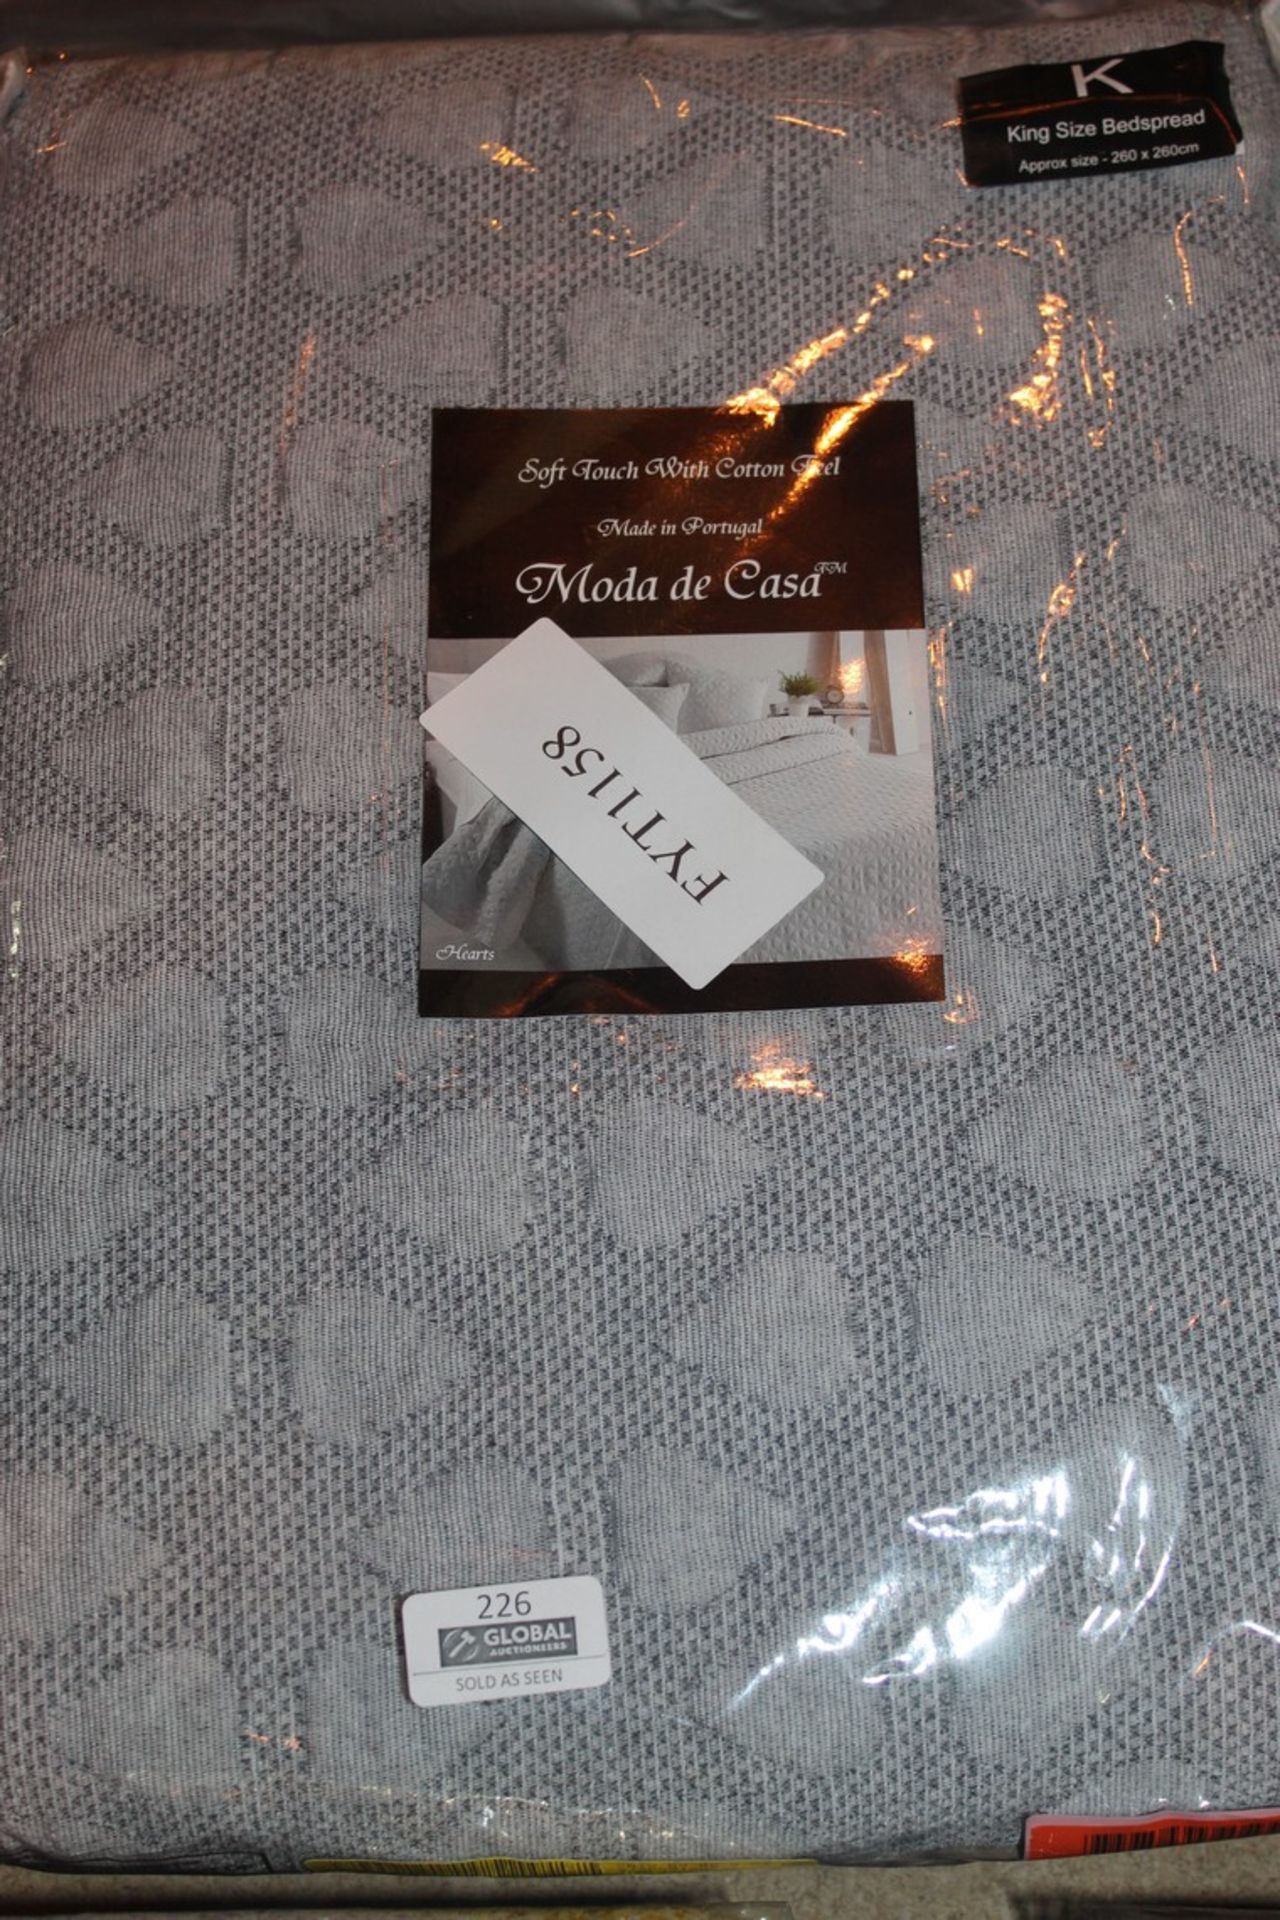 Lot to Contain 2 Assorted Bagged Brand New Bedding Items to Include a Moda De Casa King-size